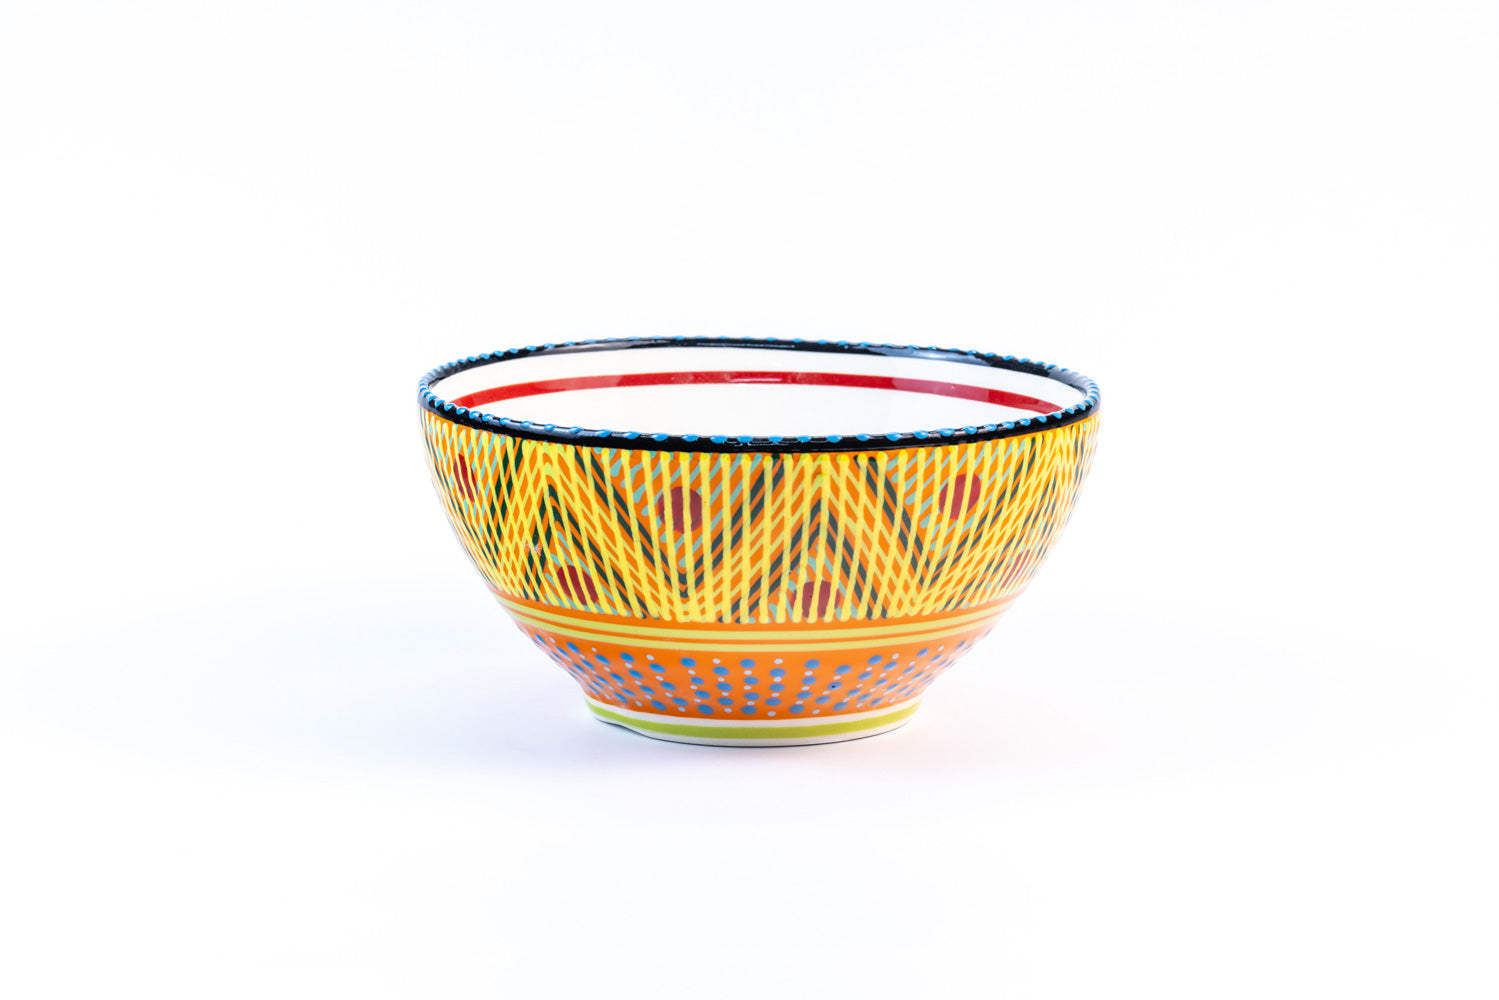 Ceramic serving bowl with base color of Orang. Dots & Stripes painted on top in fun colors of yellow, turquoise, blue, green  & red. White inside the bowl.